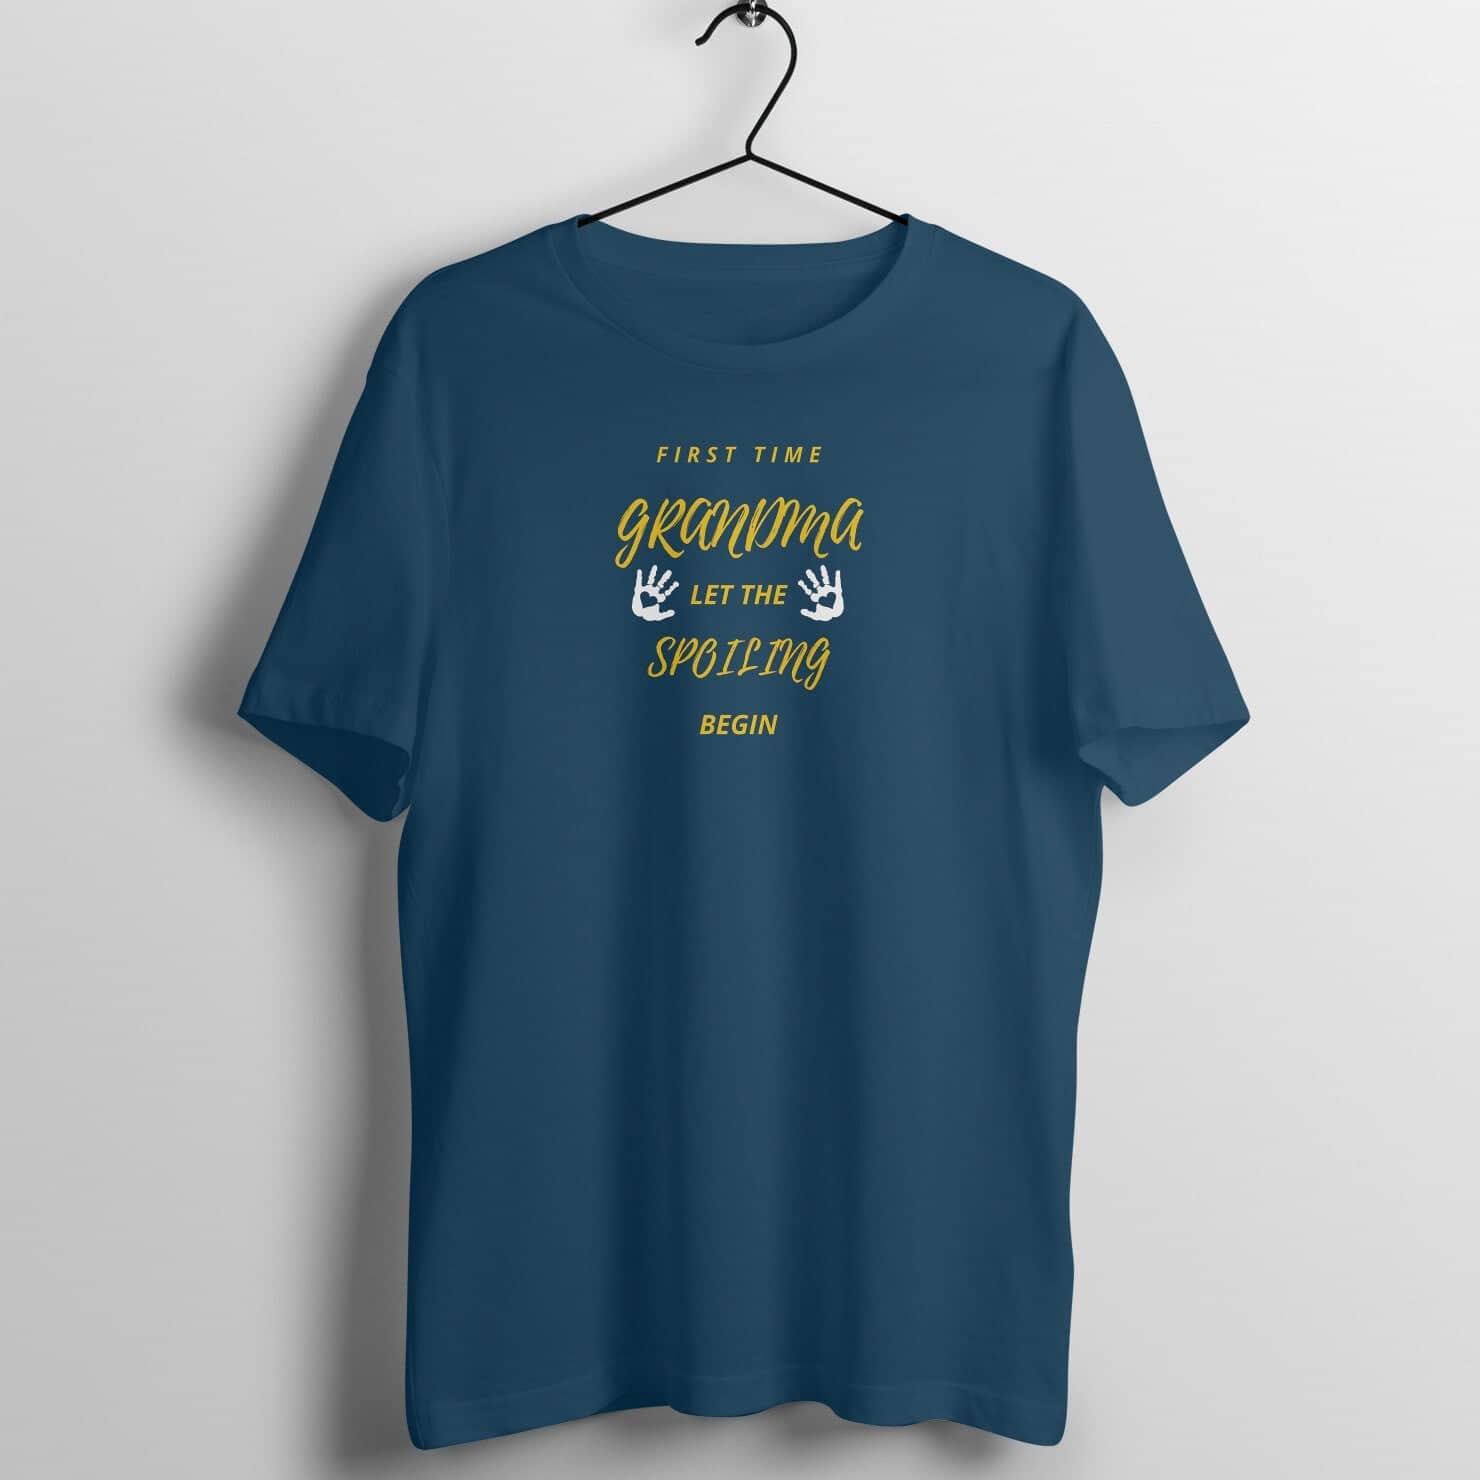 First Time Grandma Let the Spoiling Begin Special Navy Blue T Shirt for Women freeshipping - Catch My Drift India